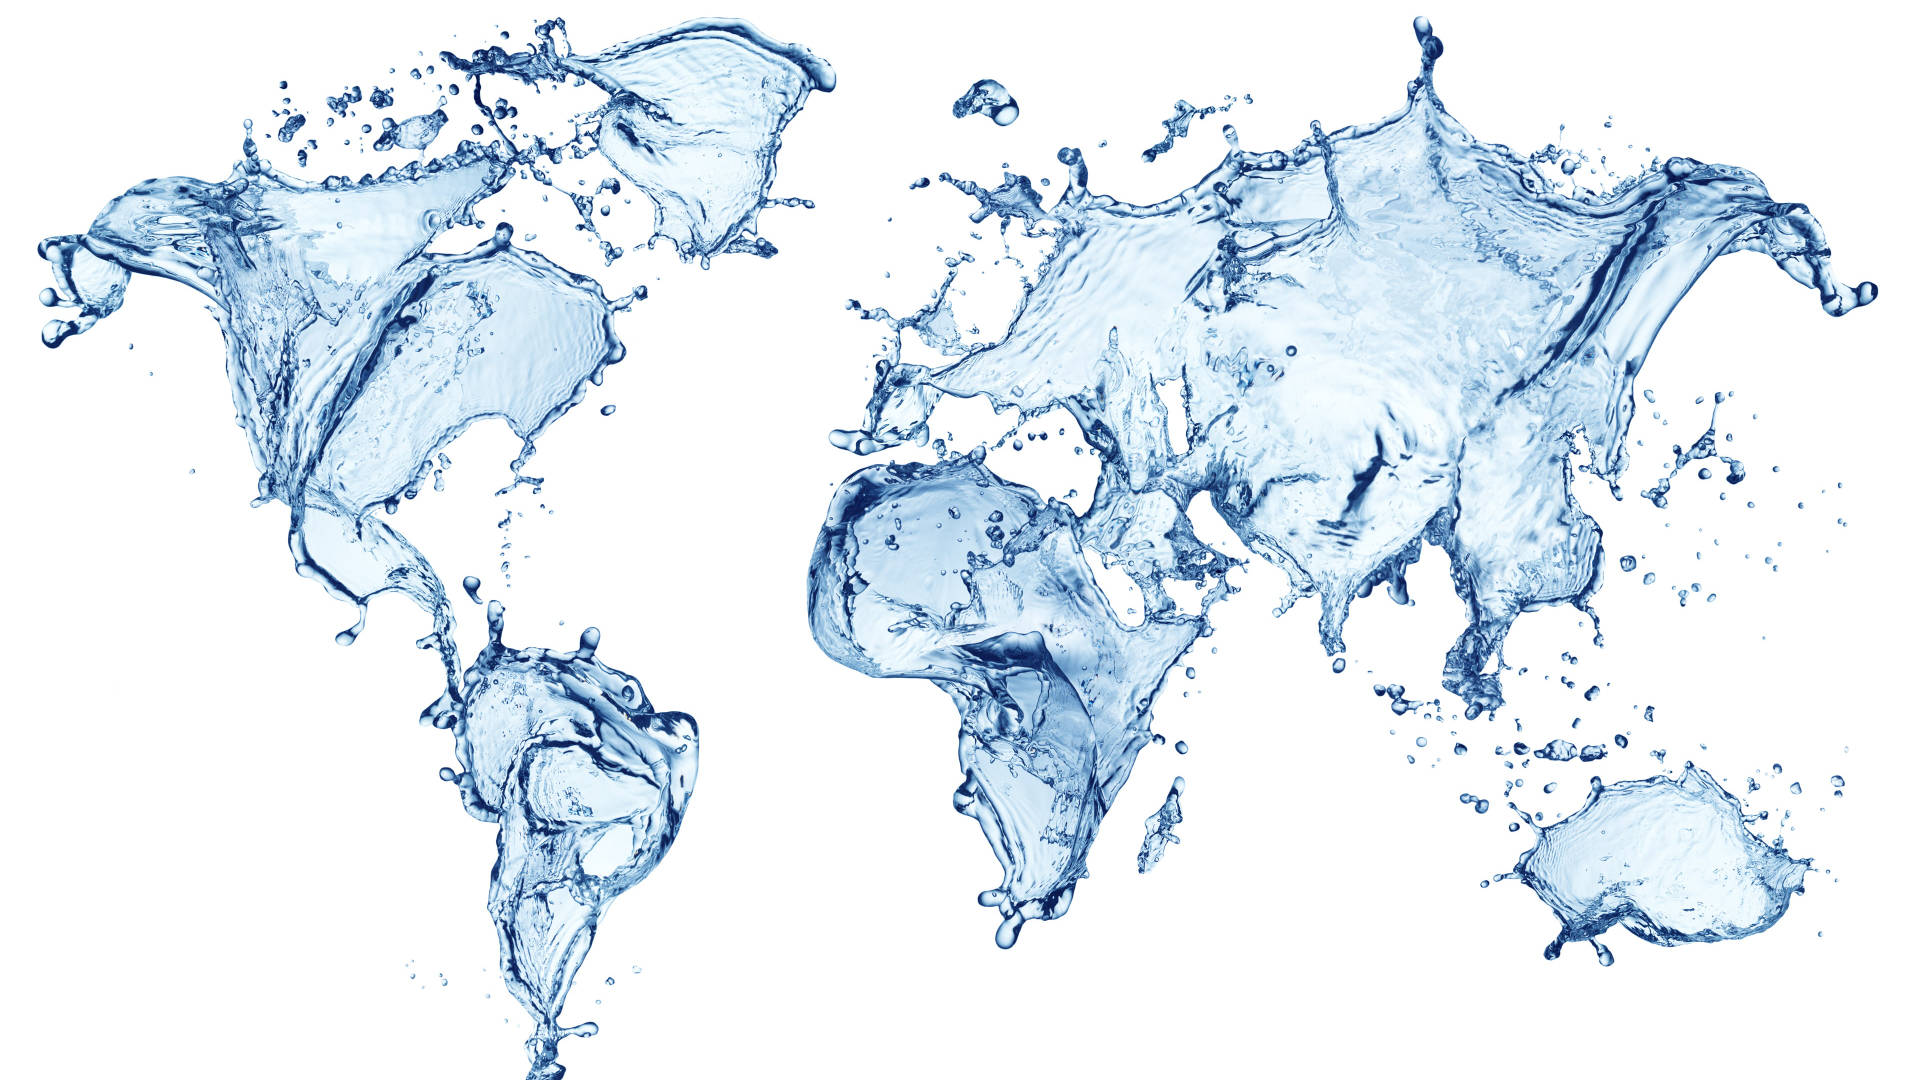 World Map Created From Water Droplets On Desktop Wallpaper